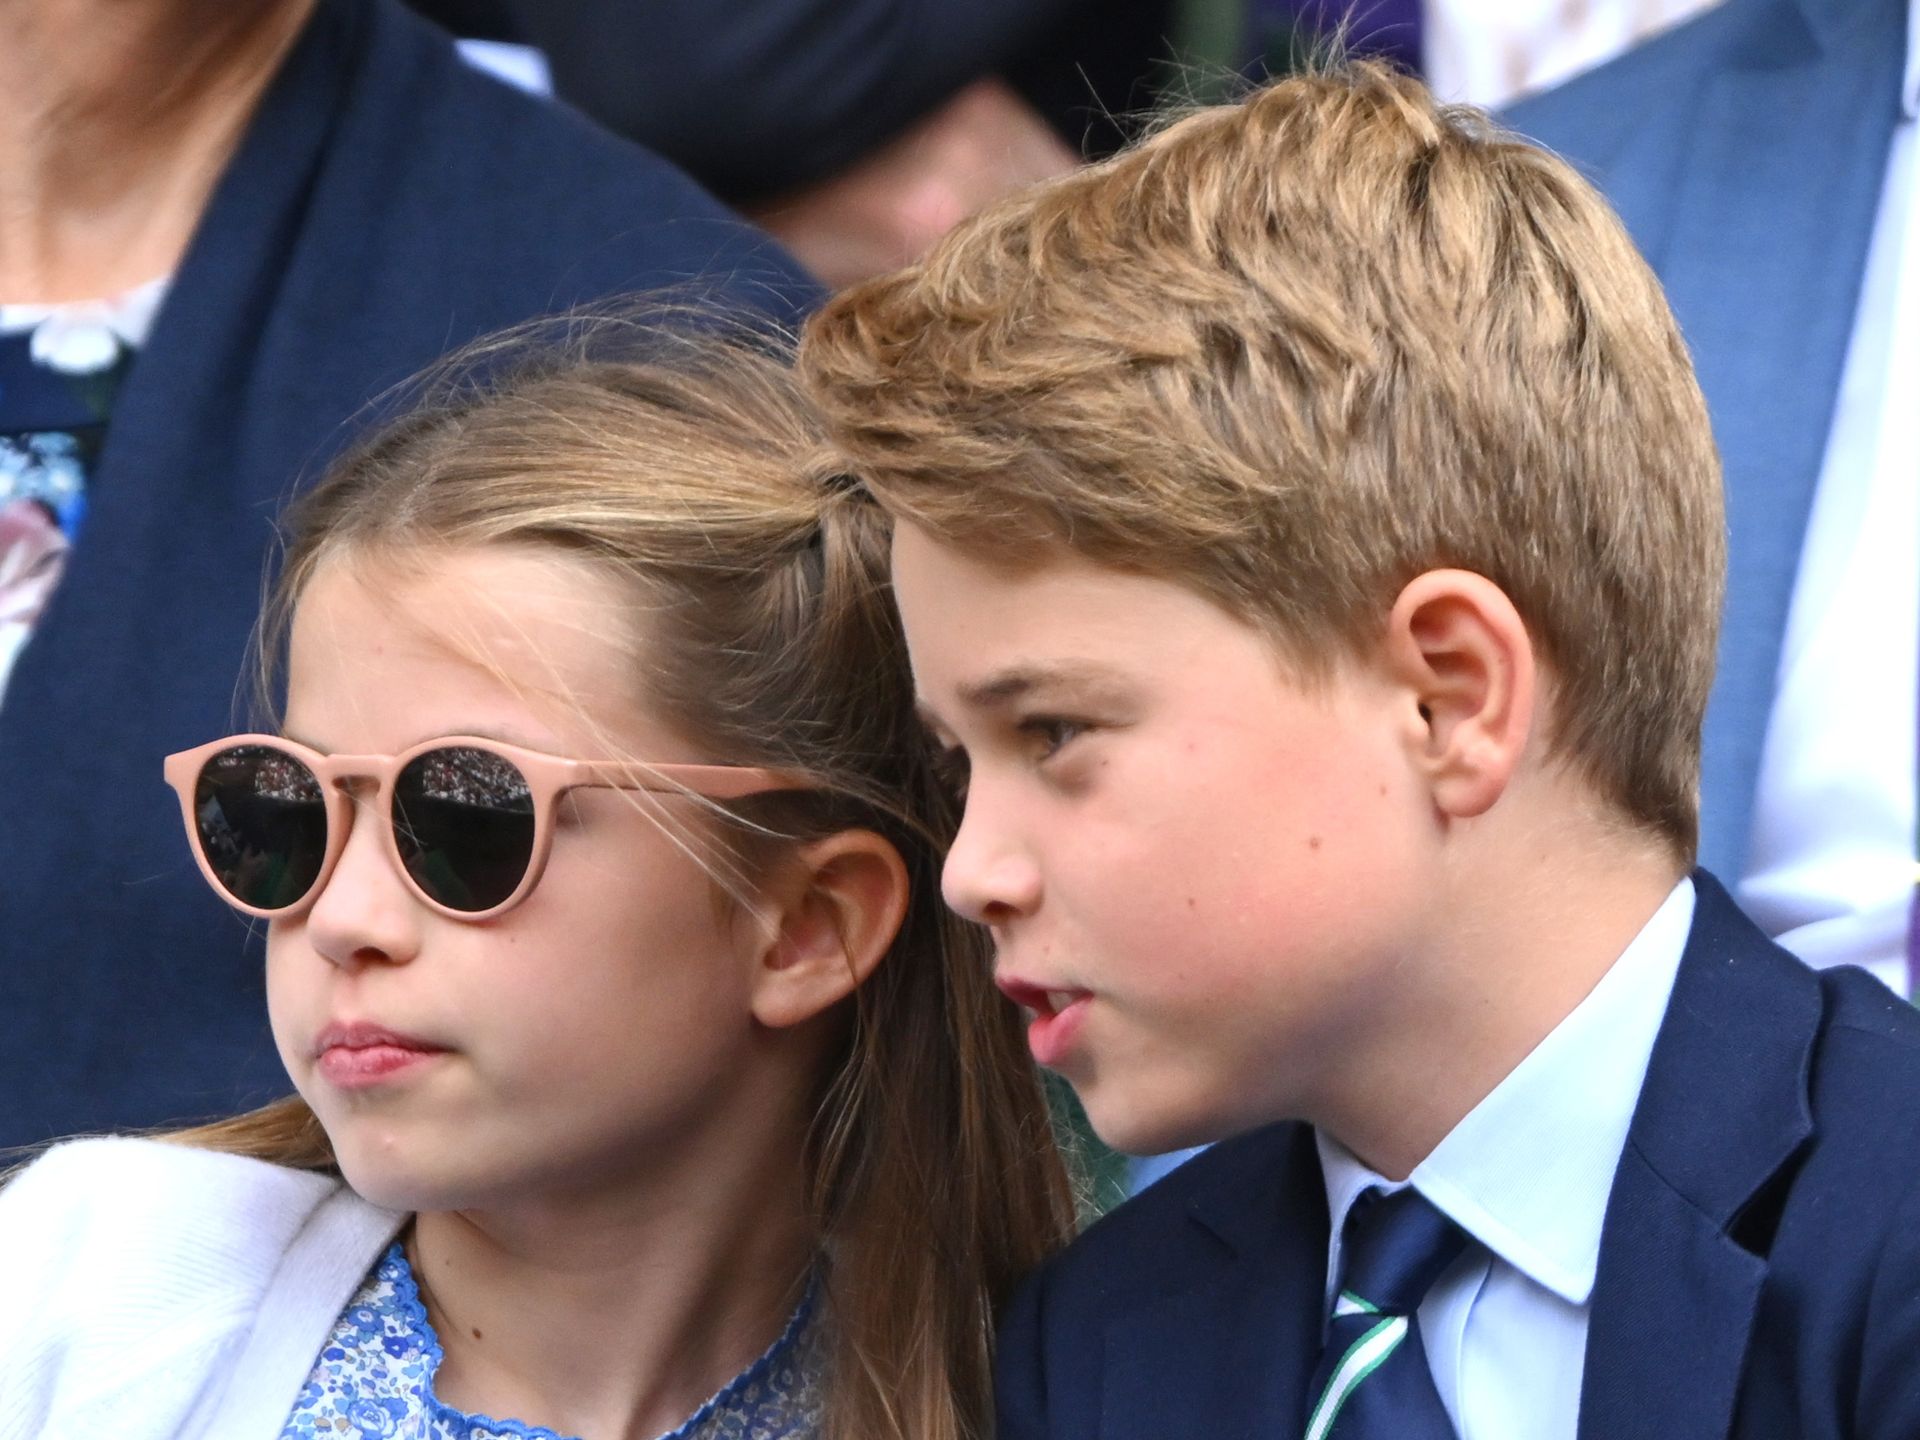 The royal family's best sunglasses moments: photos